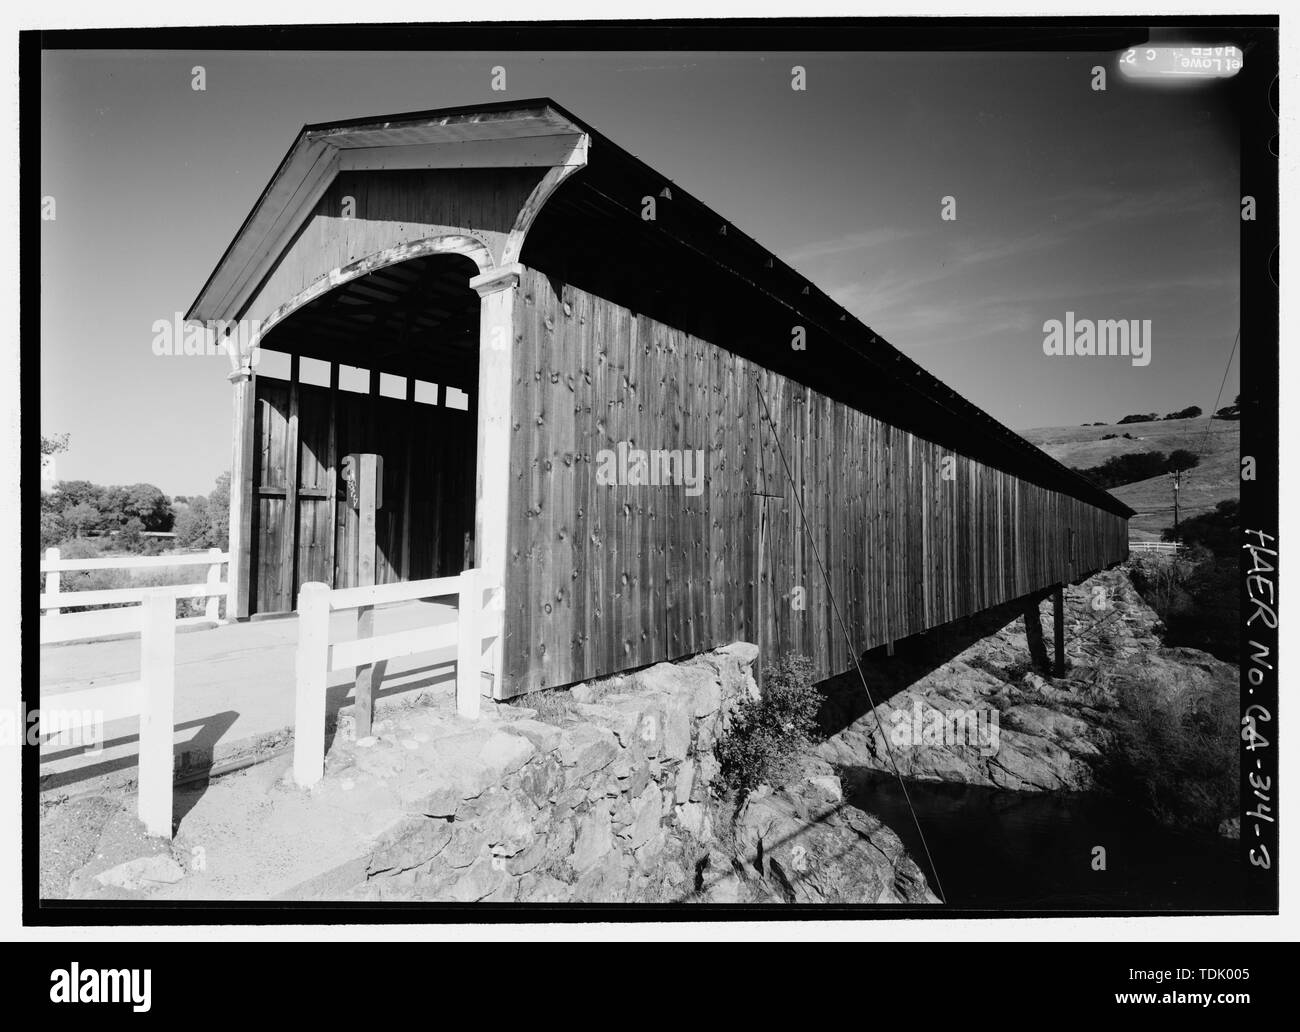 OBLIQUE PERSPECTIVE SOUTHEAST PORTAL, WEST BY 290 DEGREES - Knight's Ferry Bridge, Spanning Stanislaus River, bypassed section of Stockton-Sonora Road, Knights Ferry, Stanislaus County, CA Stock Photo